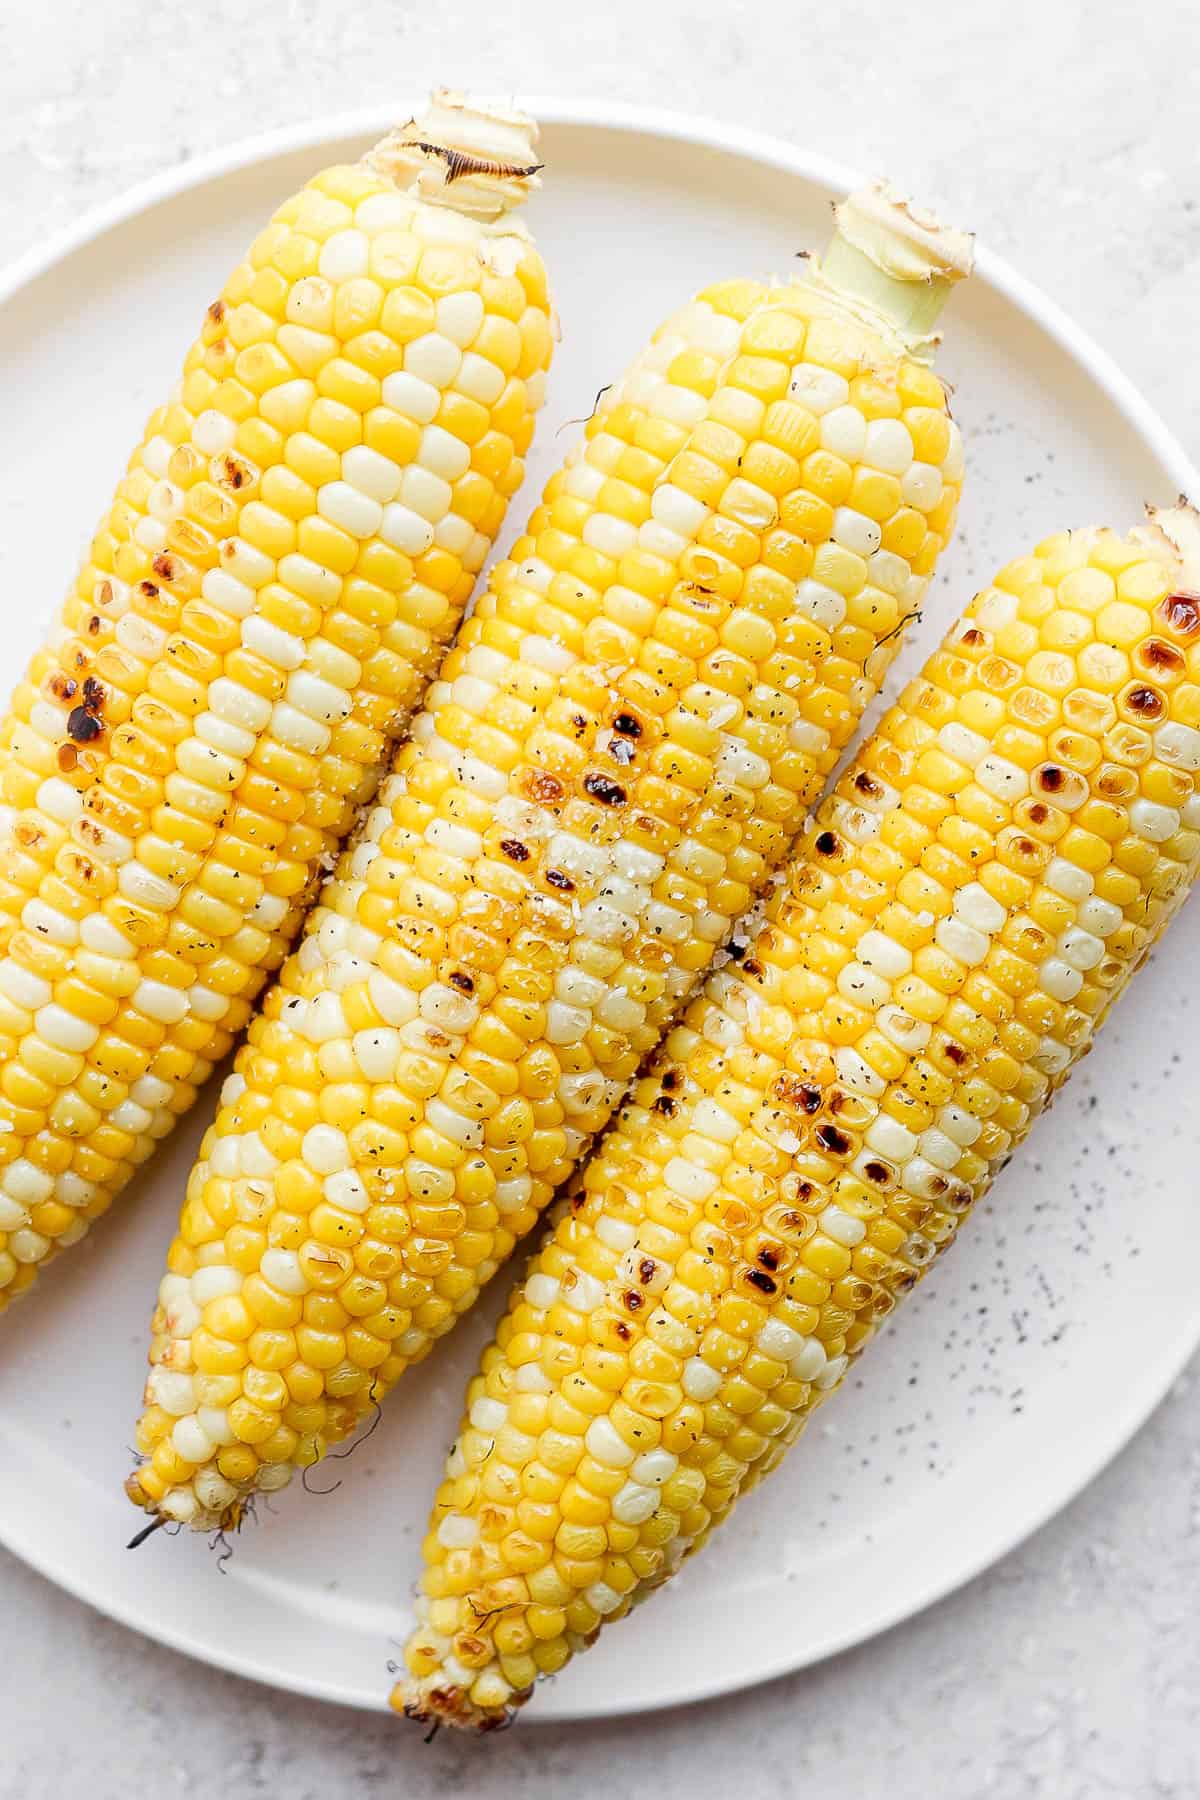 Grilled corn on the cob on a plate.